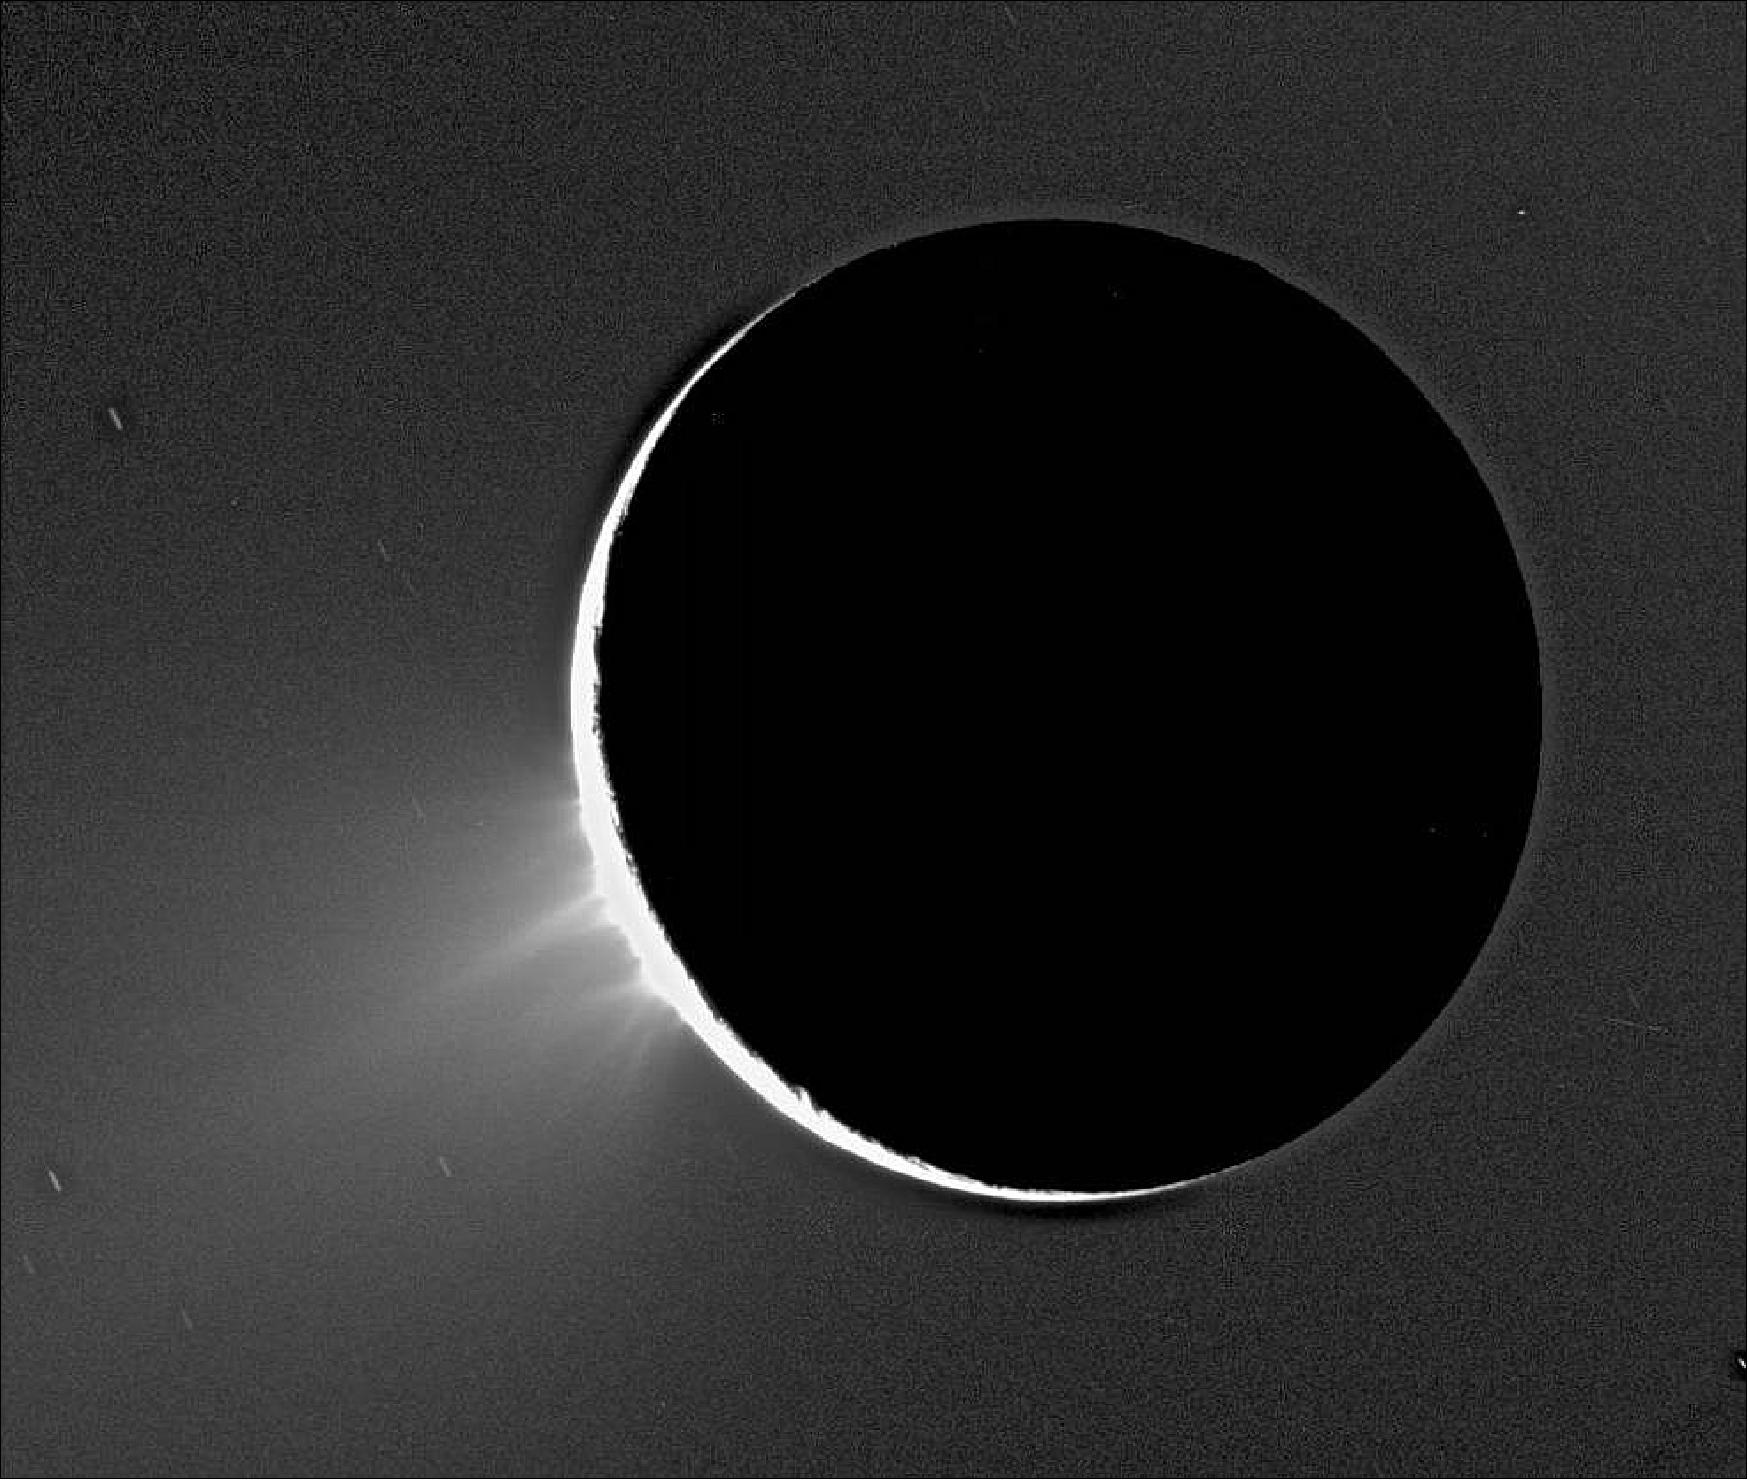 Figure 13: One of the first images of Enceladus' water jets taken by NASA's Cassini spacecraft on Nov. 27, 2005. In this image, Enceladus is backlit by the Sun (image credits: NASA/JPL/Space Science Institute)